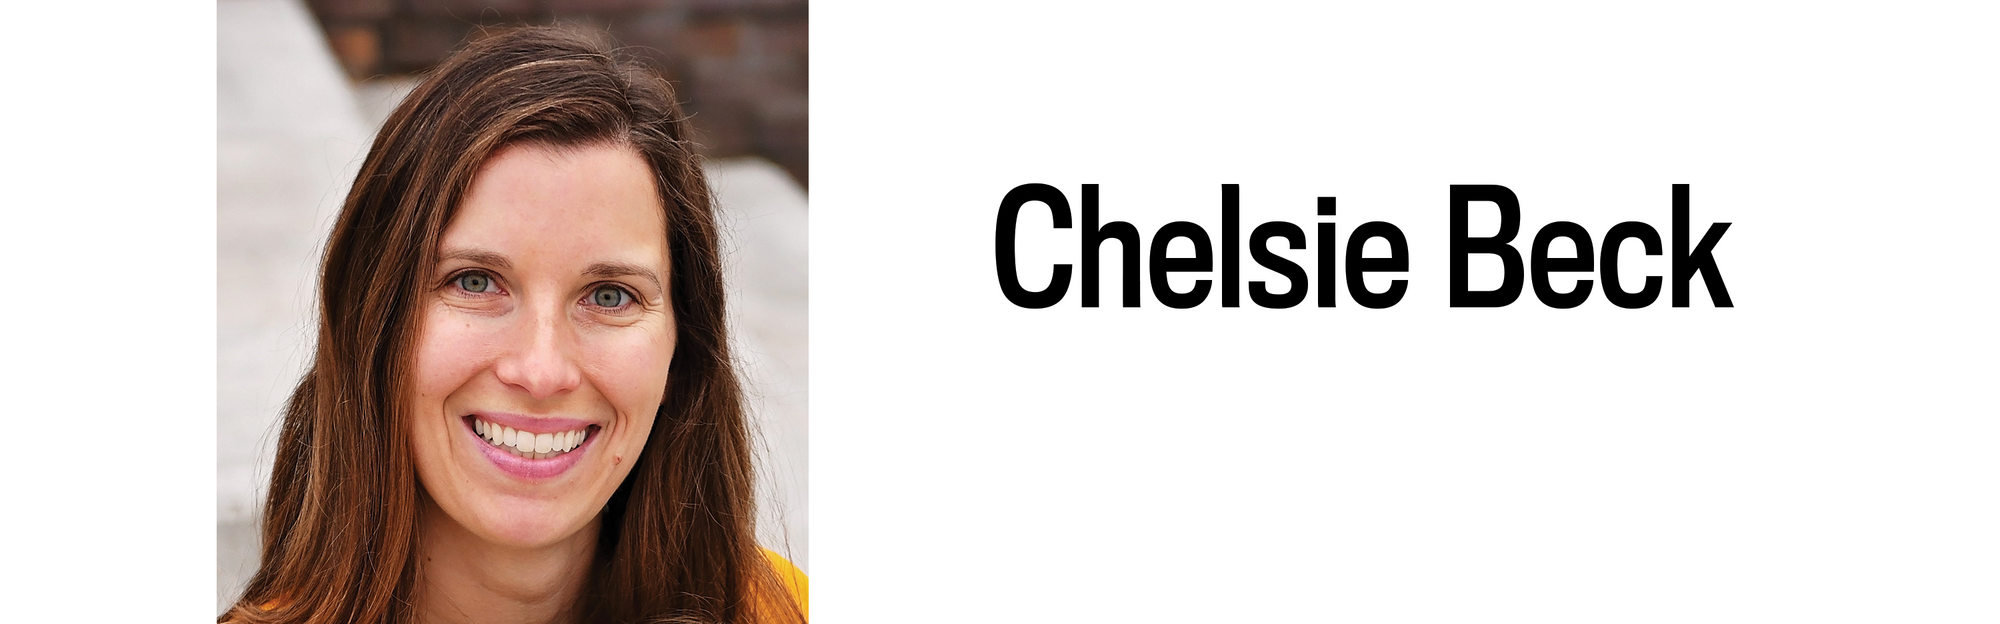 A headshot and heading for Chelsie Beck